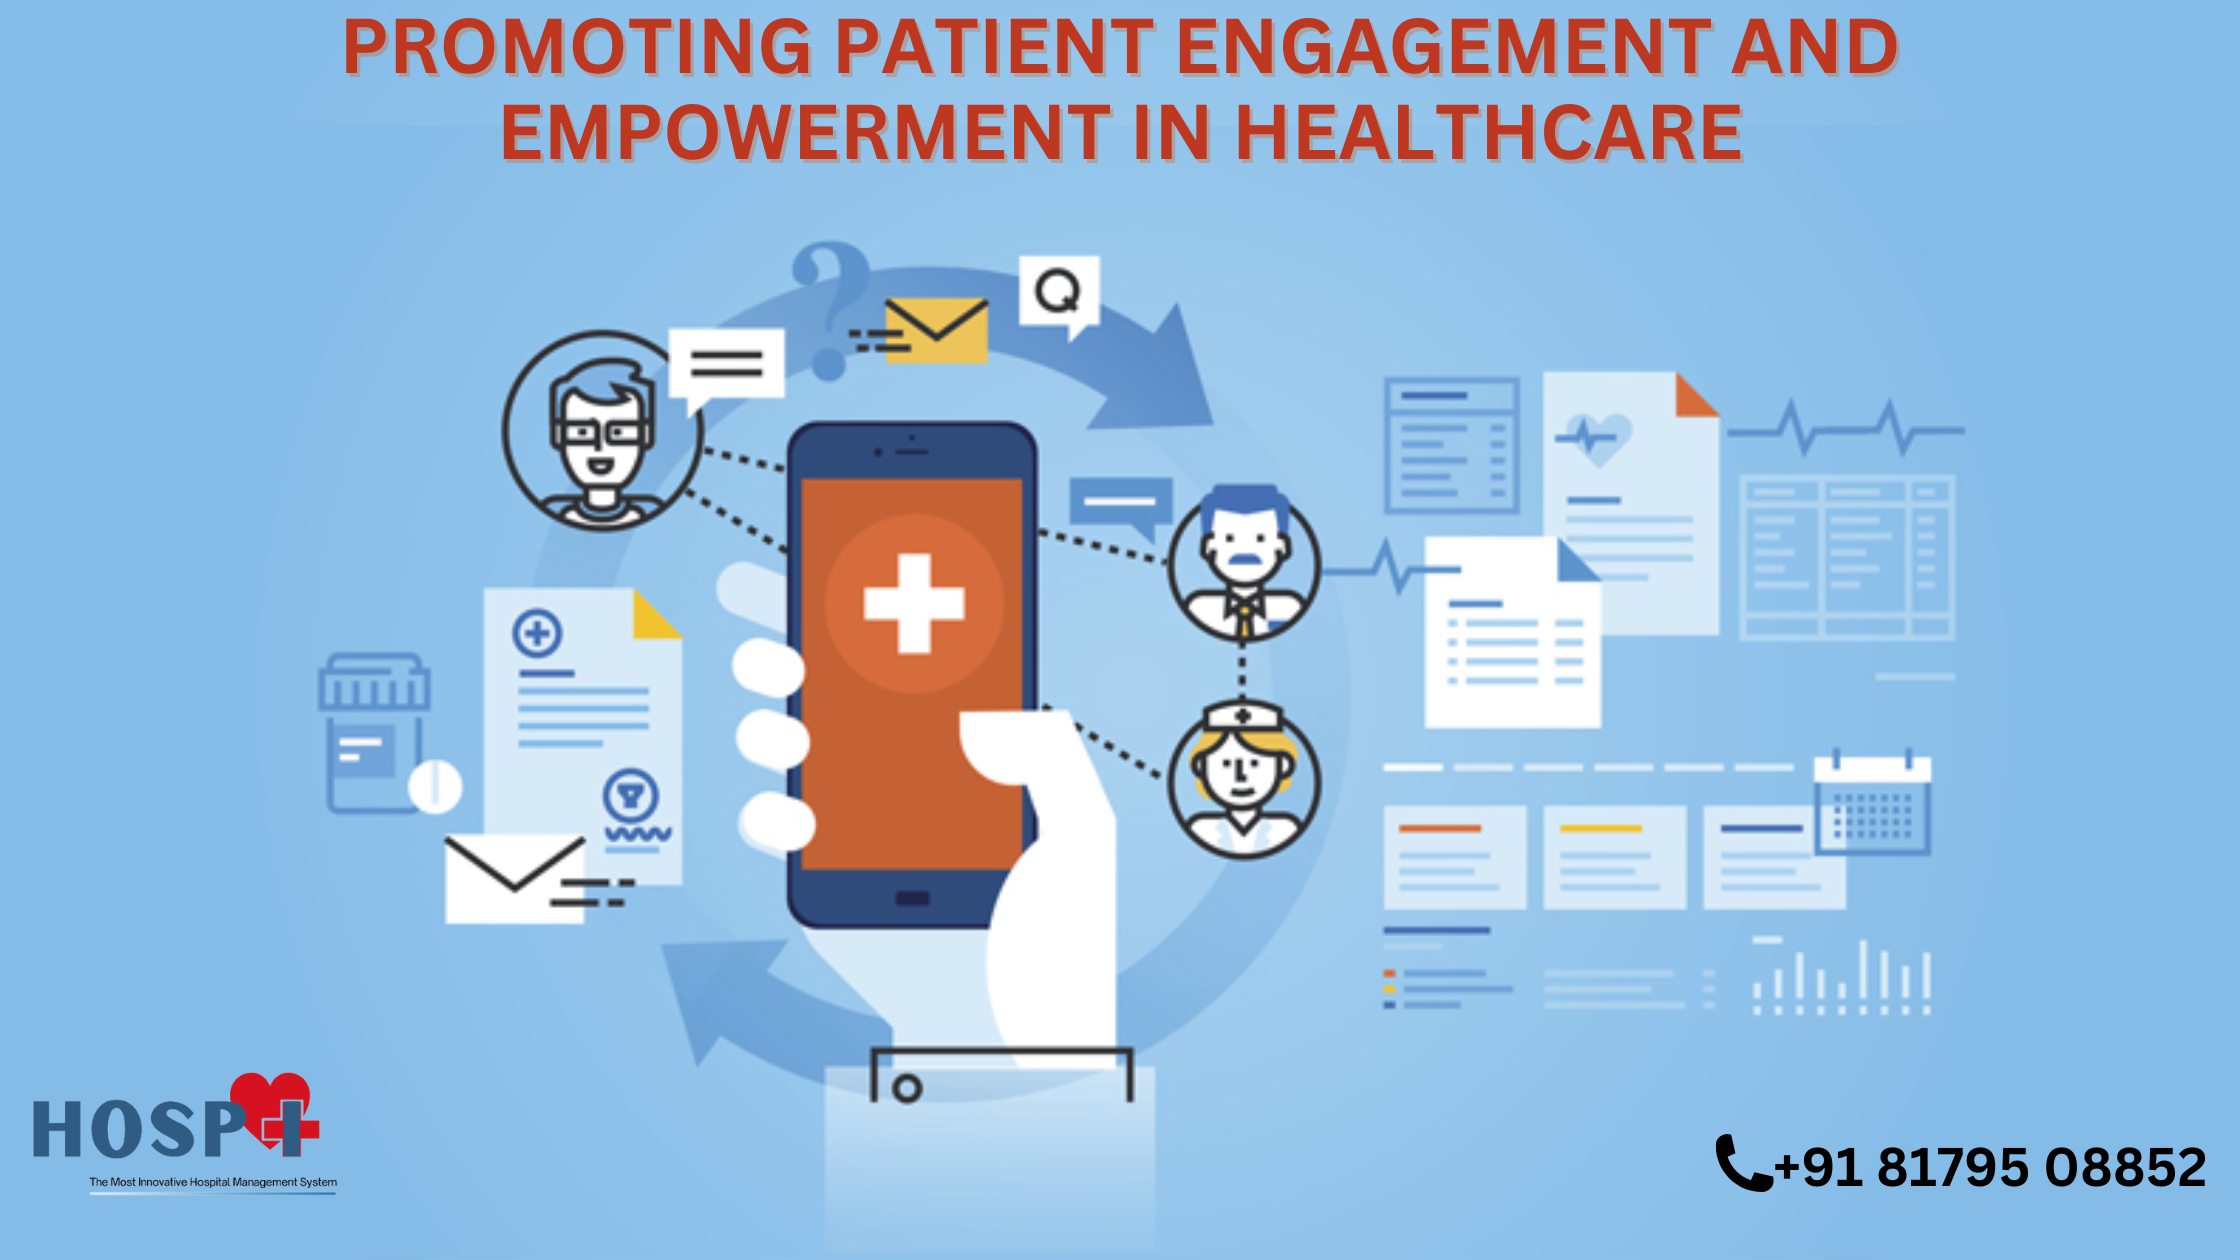 Promoting Patient Engagement and Empowerment in Healthcare